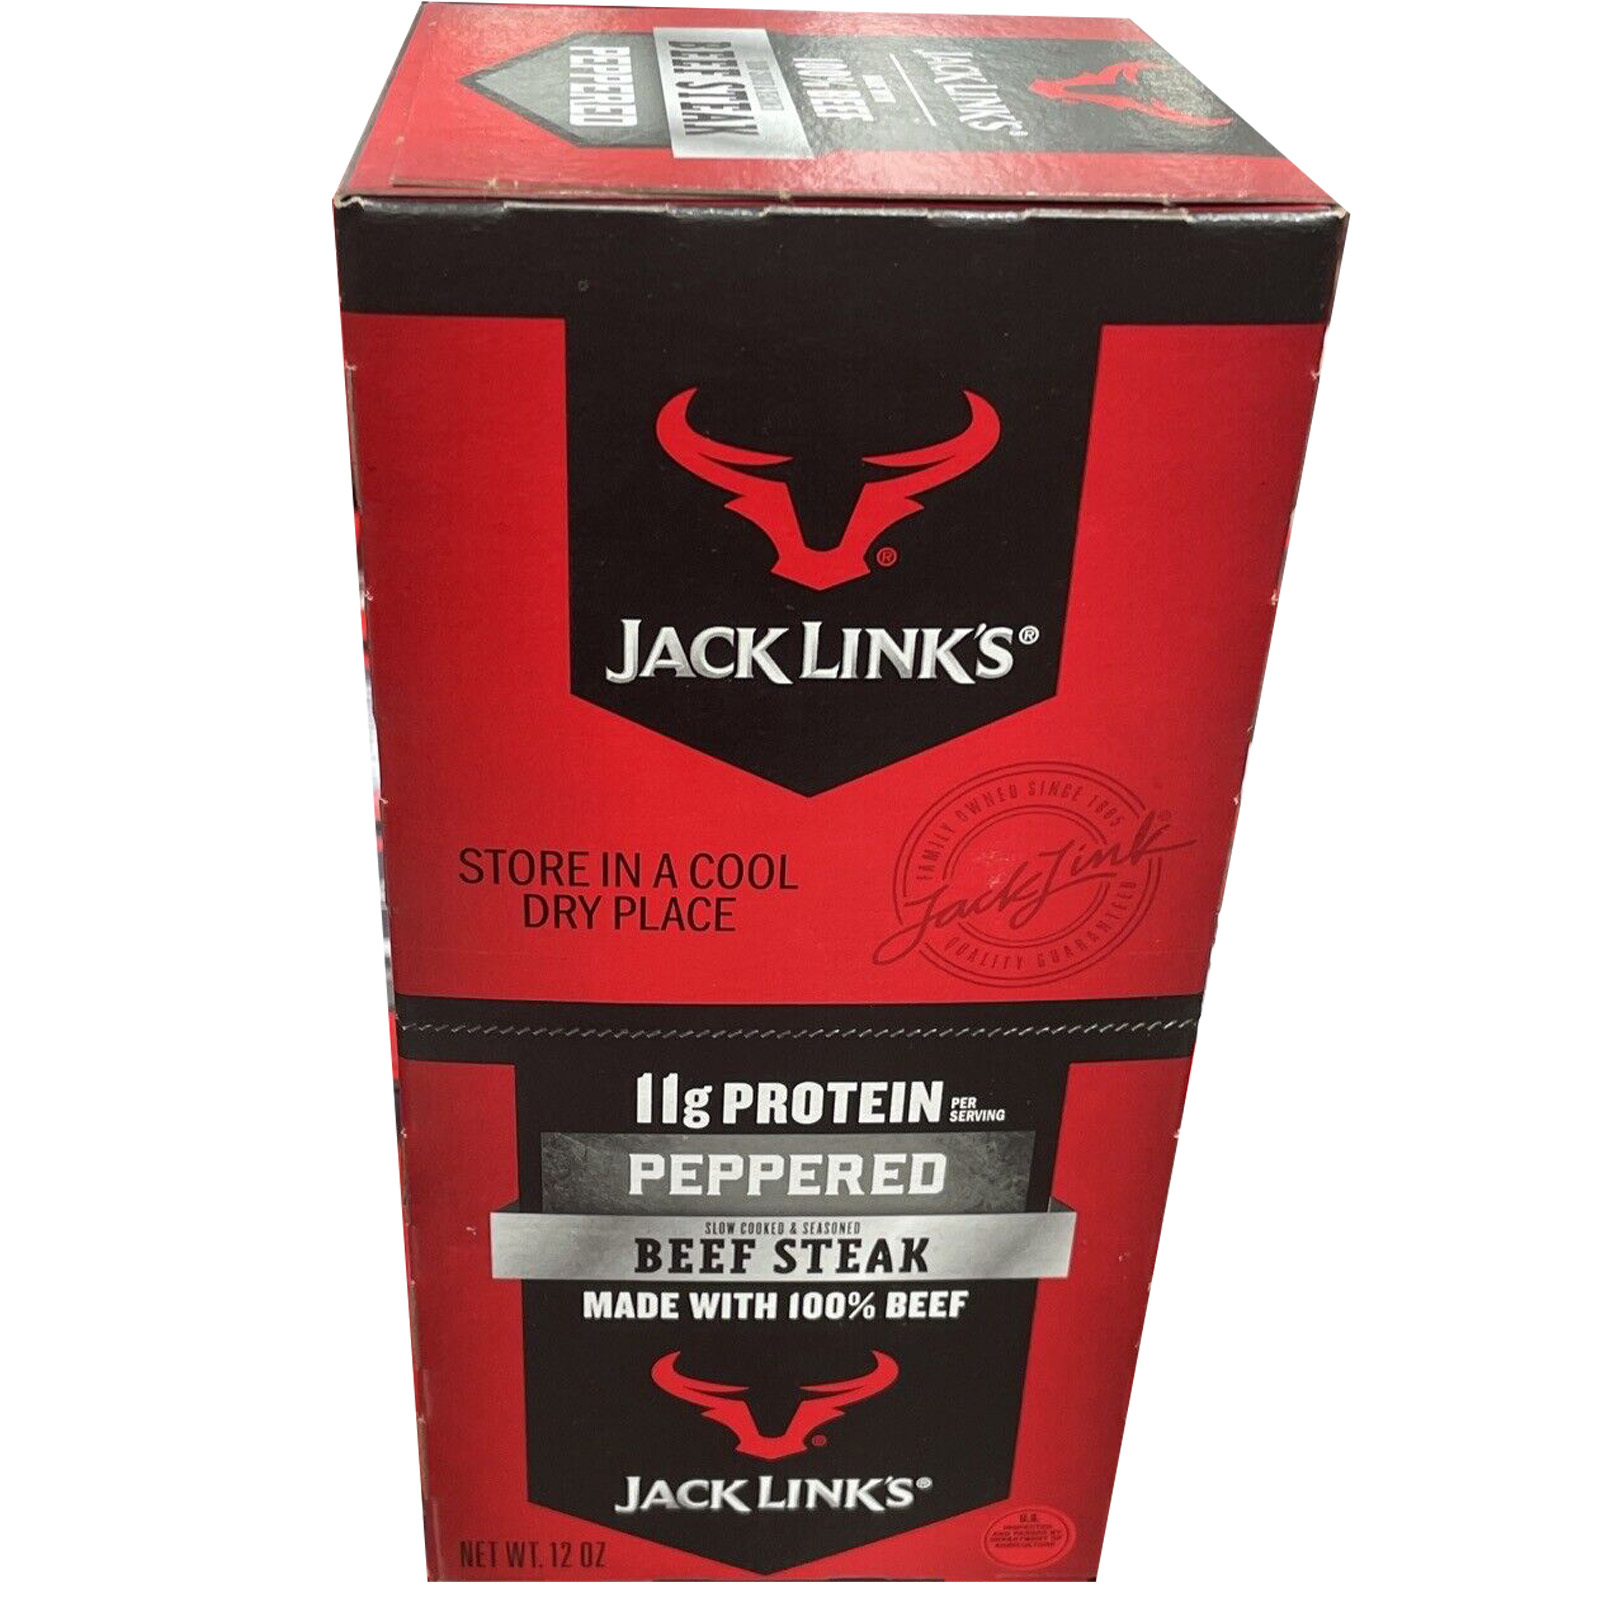 Primary image for Jack Link's Premium Cuts Beef Steak, Peppered, 1-Ounce (Pack of 12)